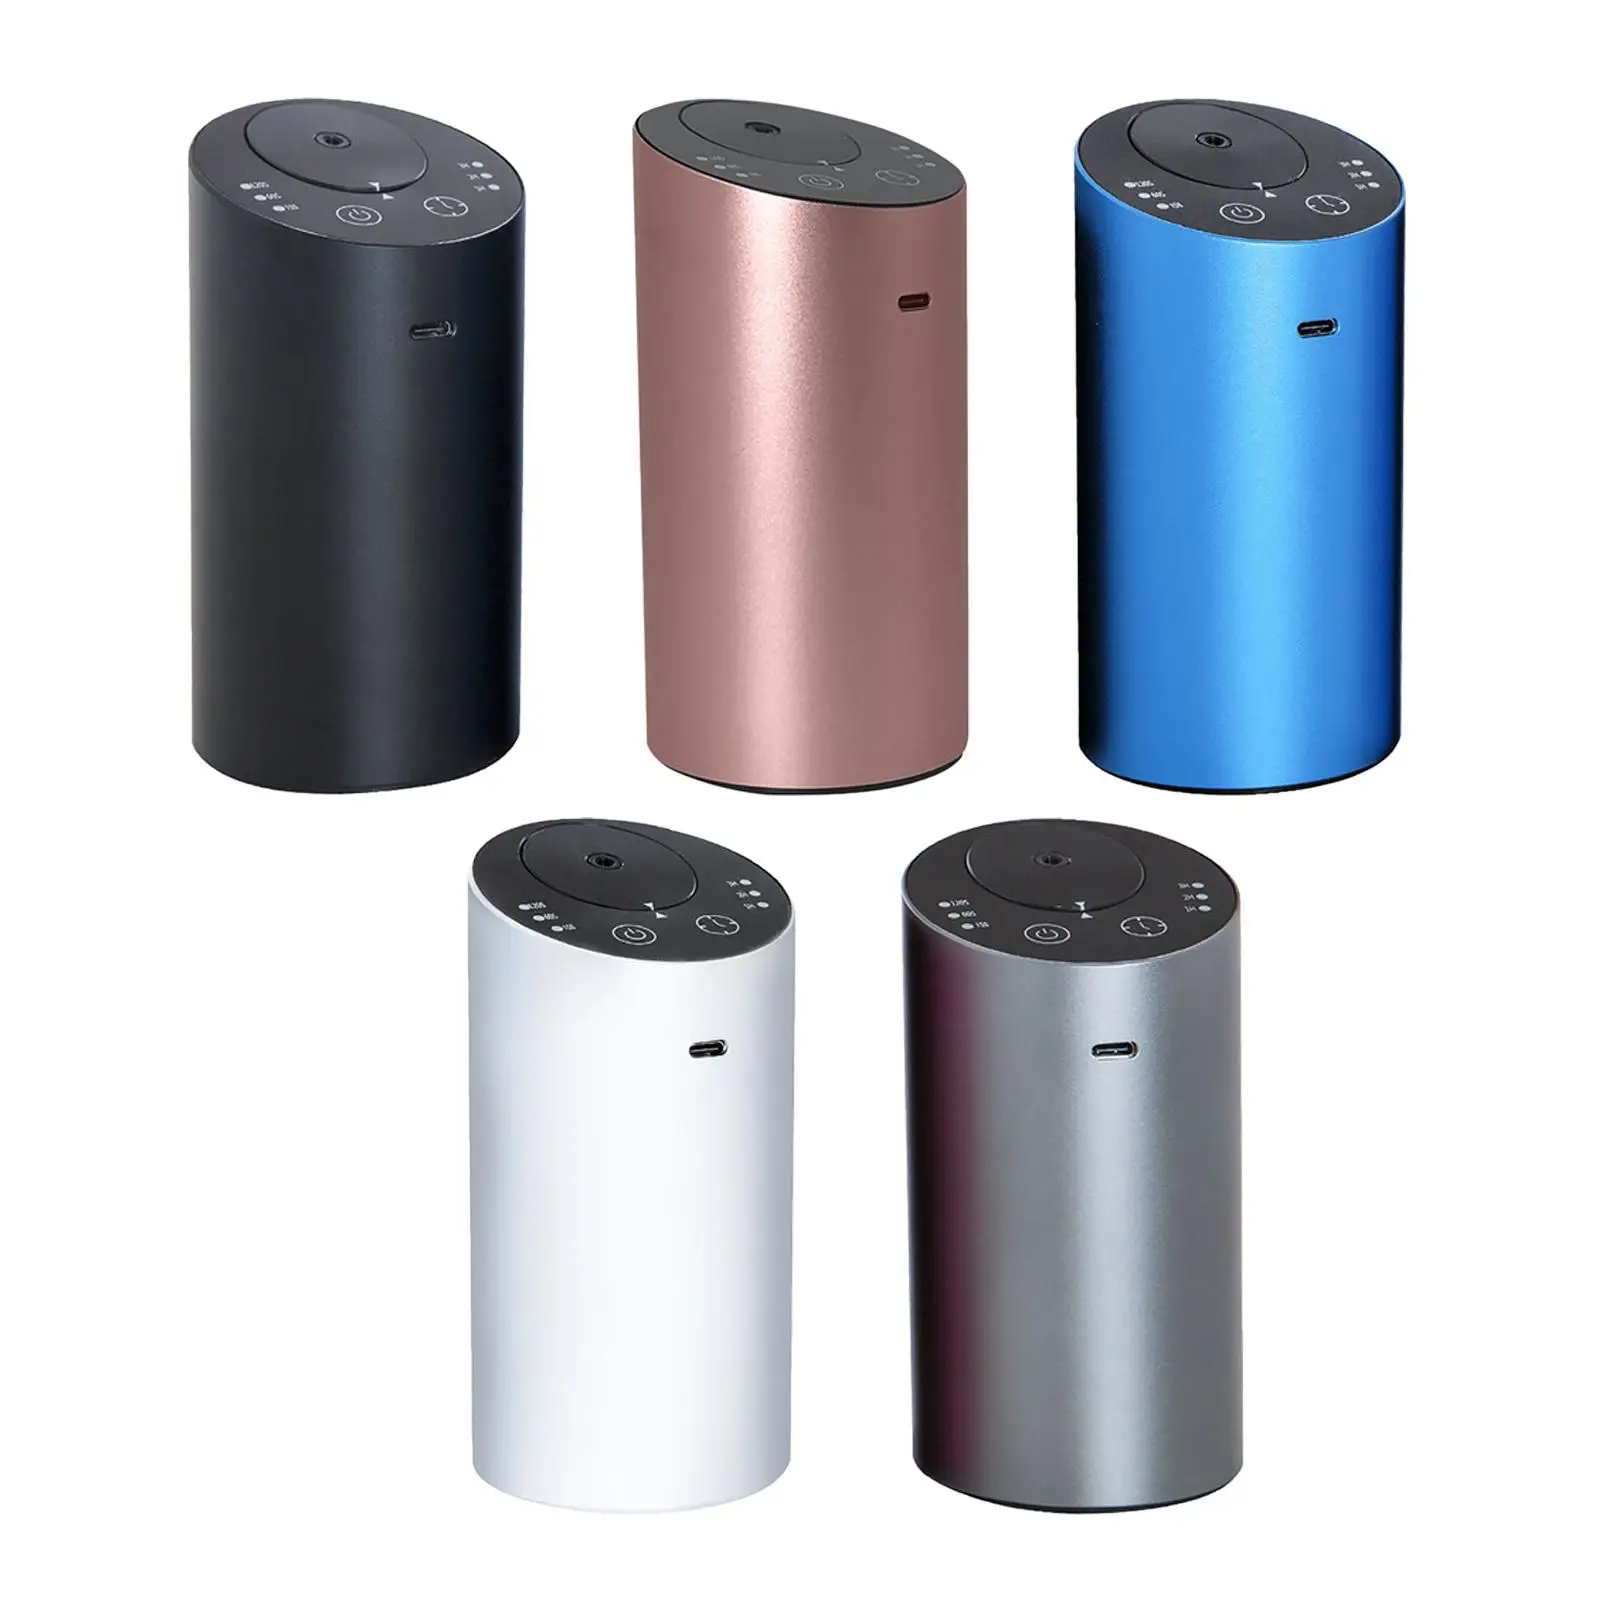  Diffuser Humidifier  Portable  USB Car Diffuser  Diffuser  Freshener for Car Bedroom office and home